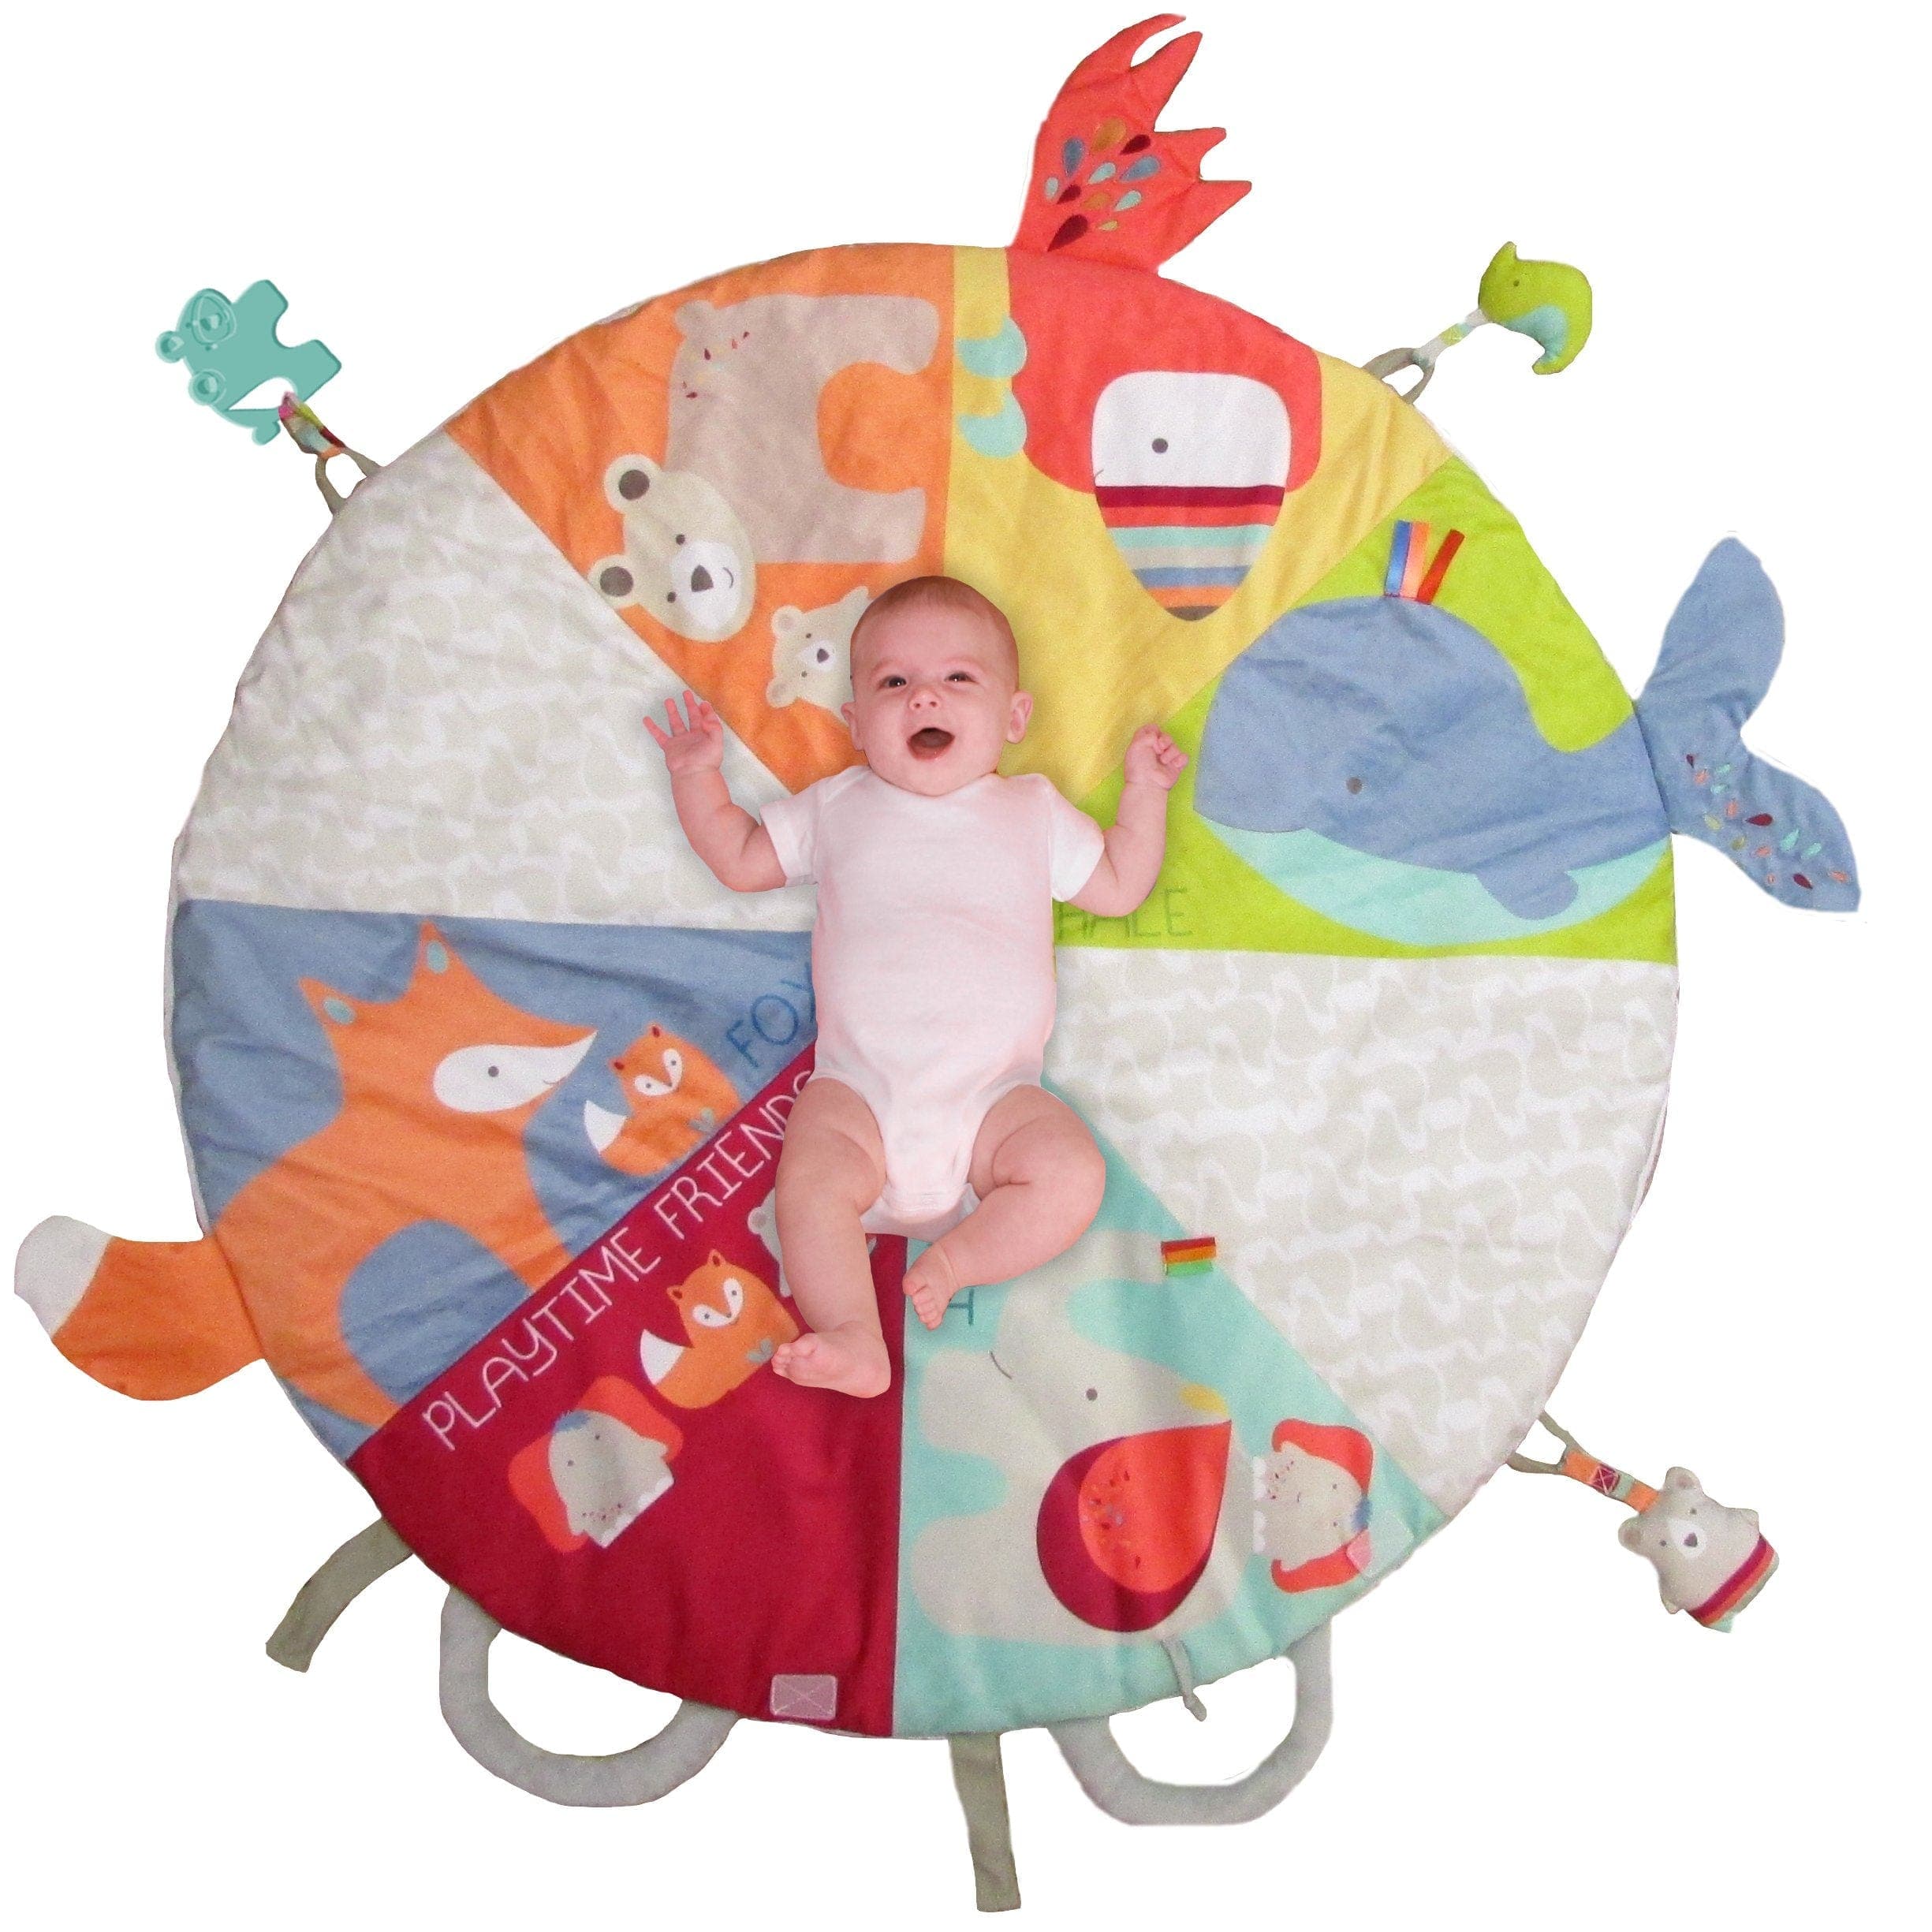 Kids Preferred-Rise & Shine Playtime Friends on-the-go Playmat-62115-Legacy Toys